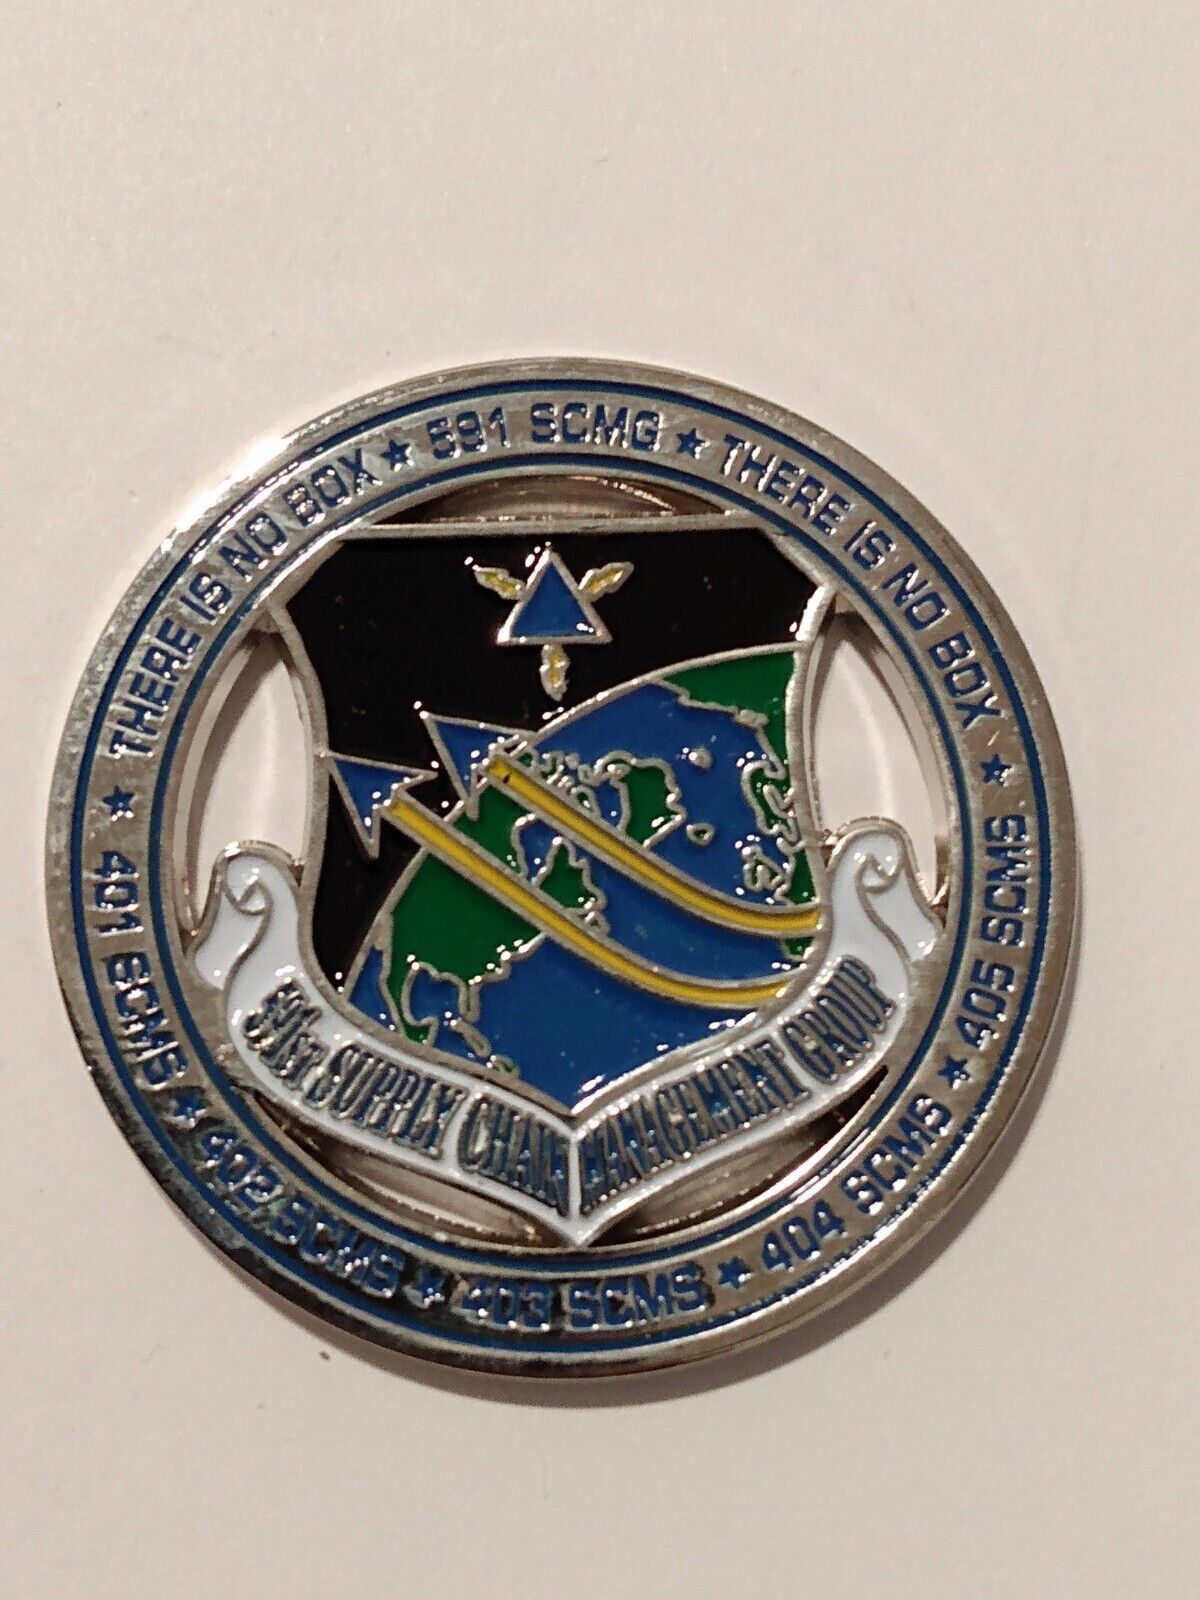 AF Global Logistics Support CTR 591st Supply Chain Challenge Coin